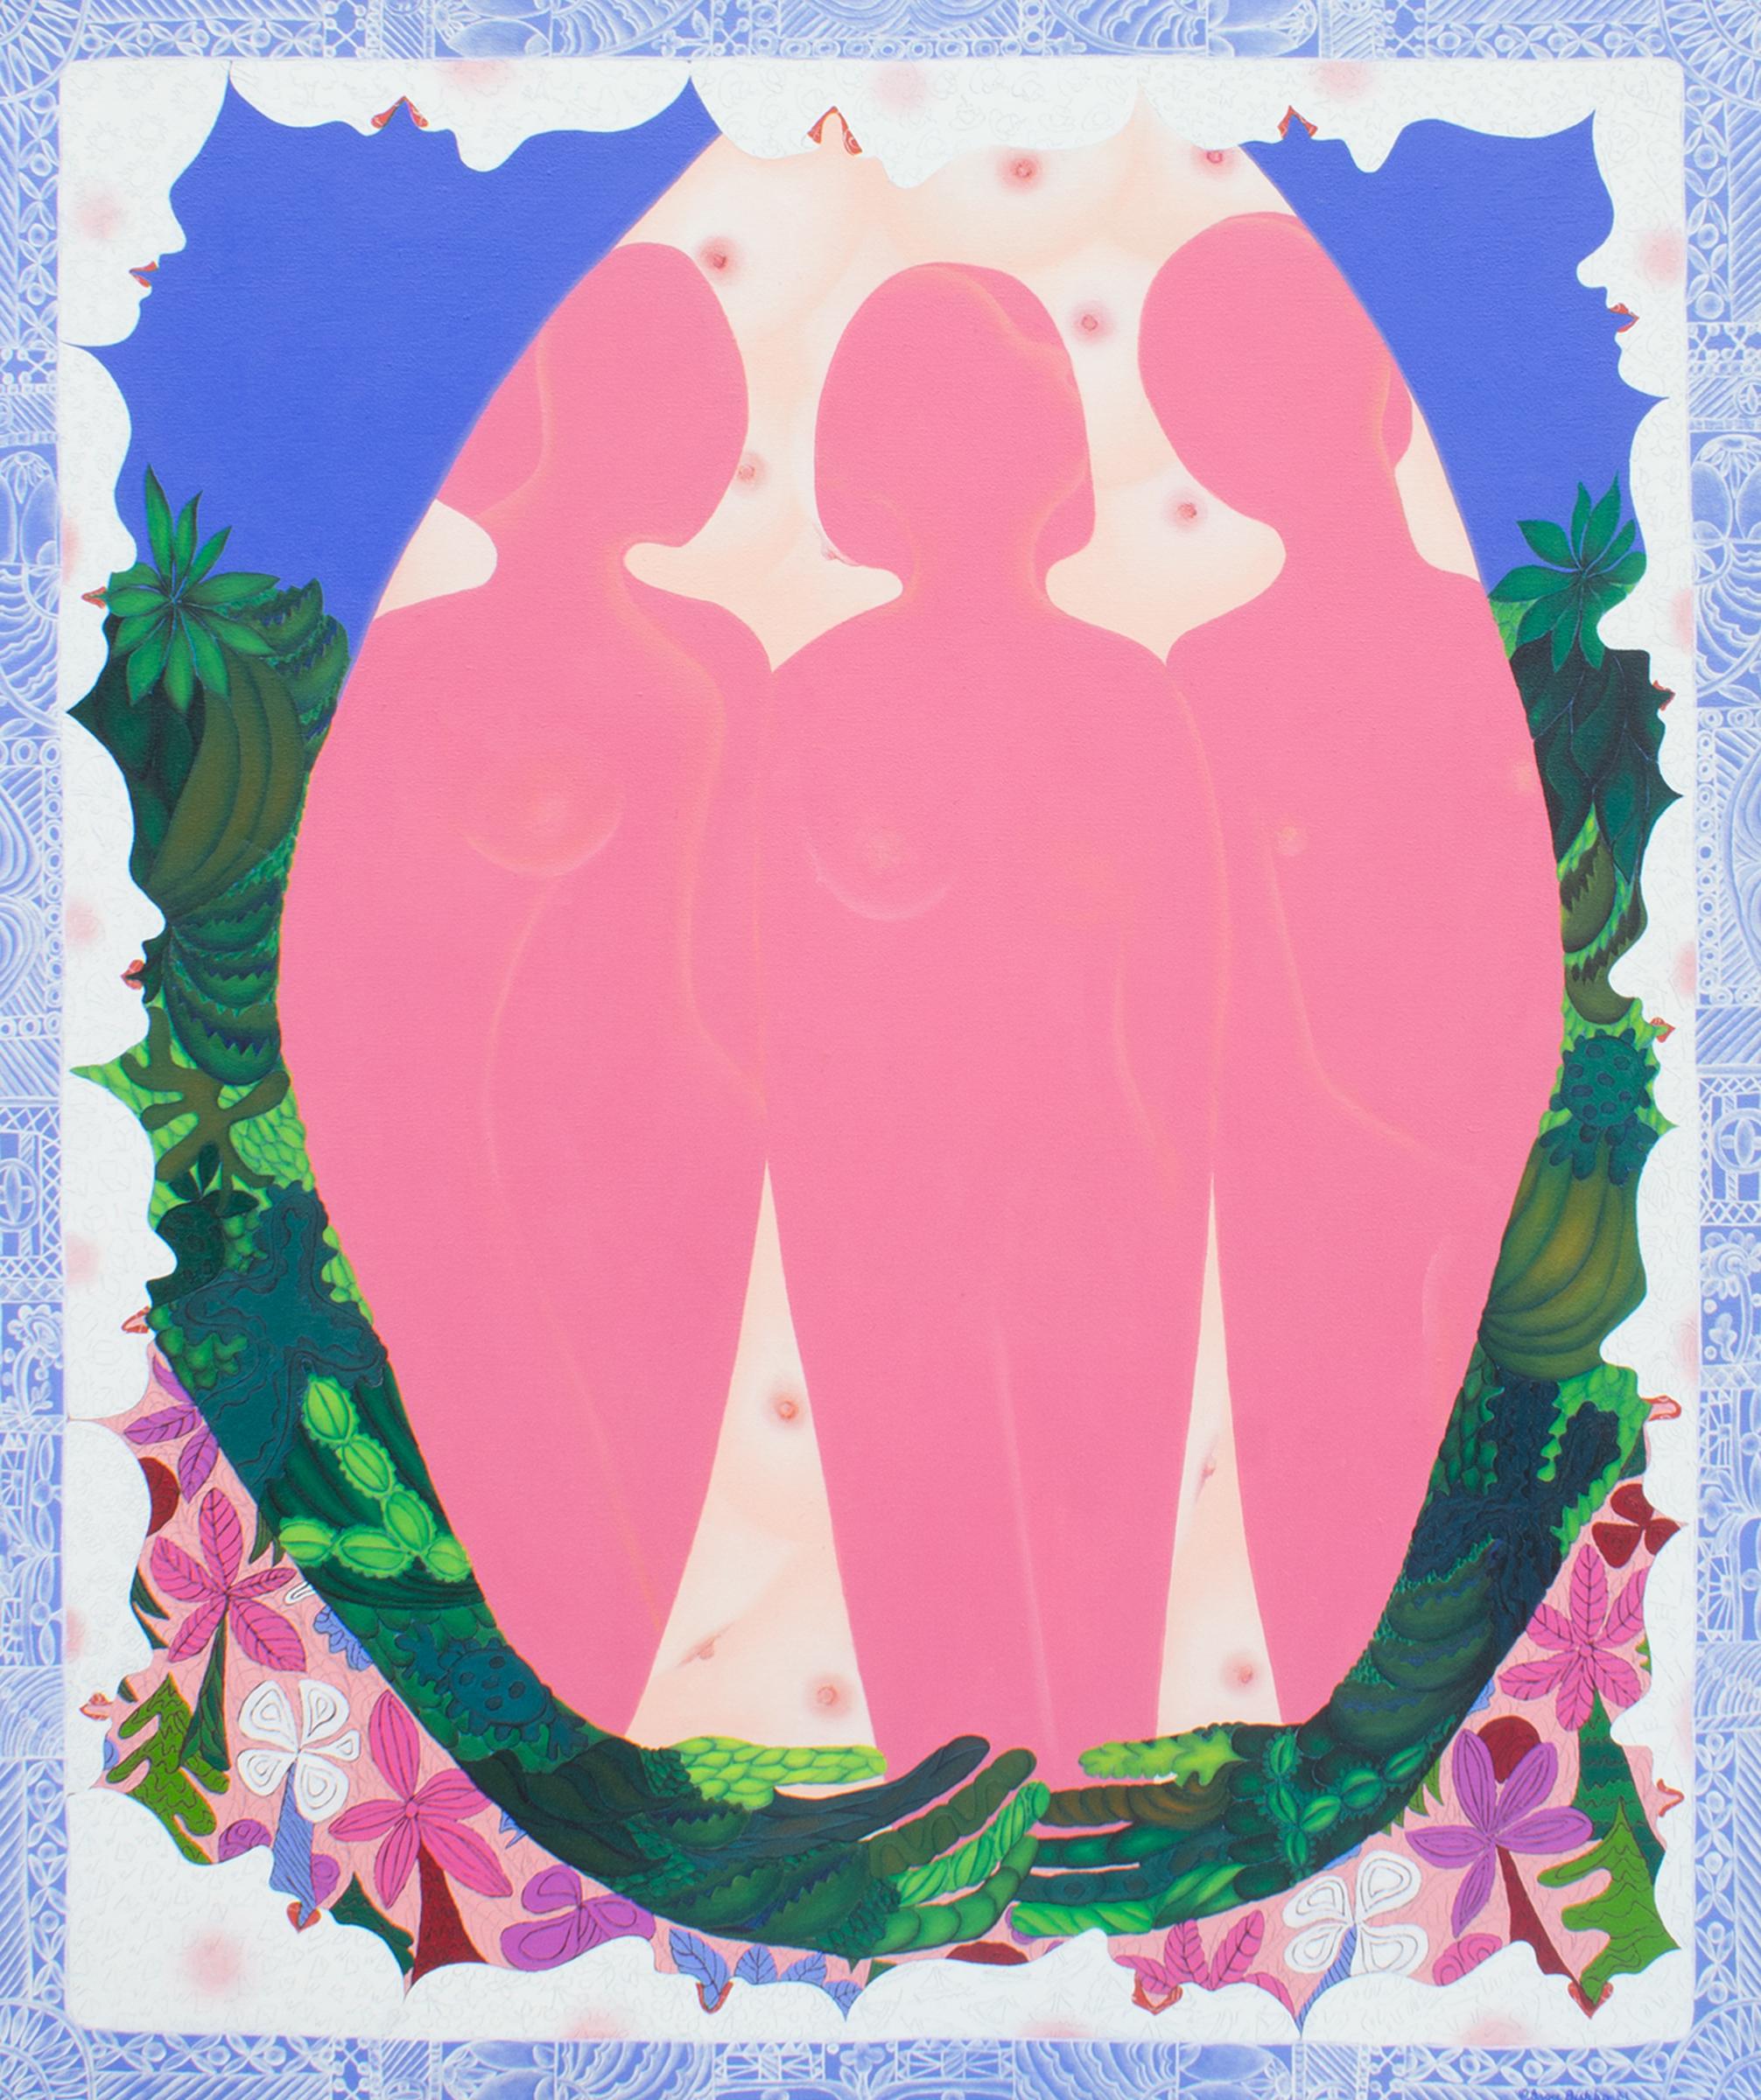 A 1981 oil on canvas painting by the American artist Grace Bishko. Titled Mother Ego and Her Pressure Cooker, this vibrant painting depicts three pink female figures at the center embraced two two arms formed from a sky above and a collection of